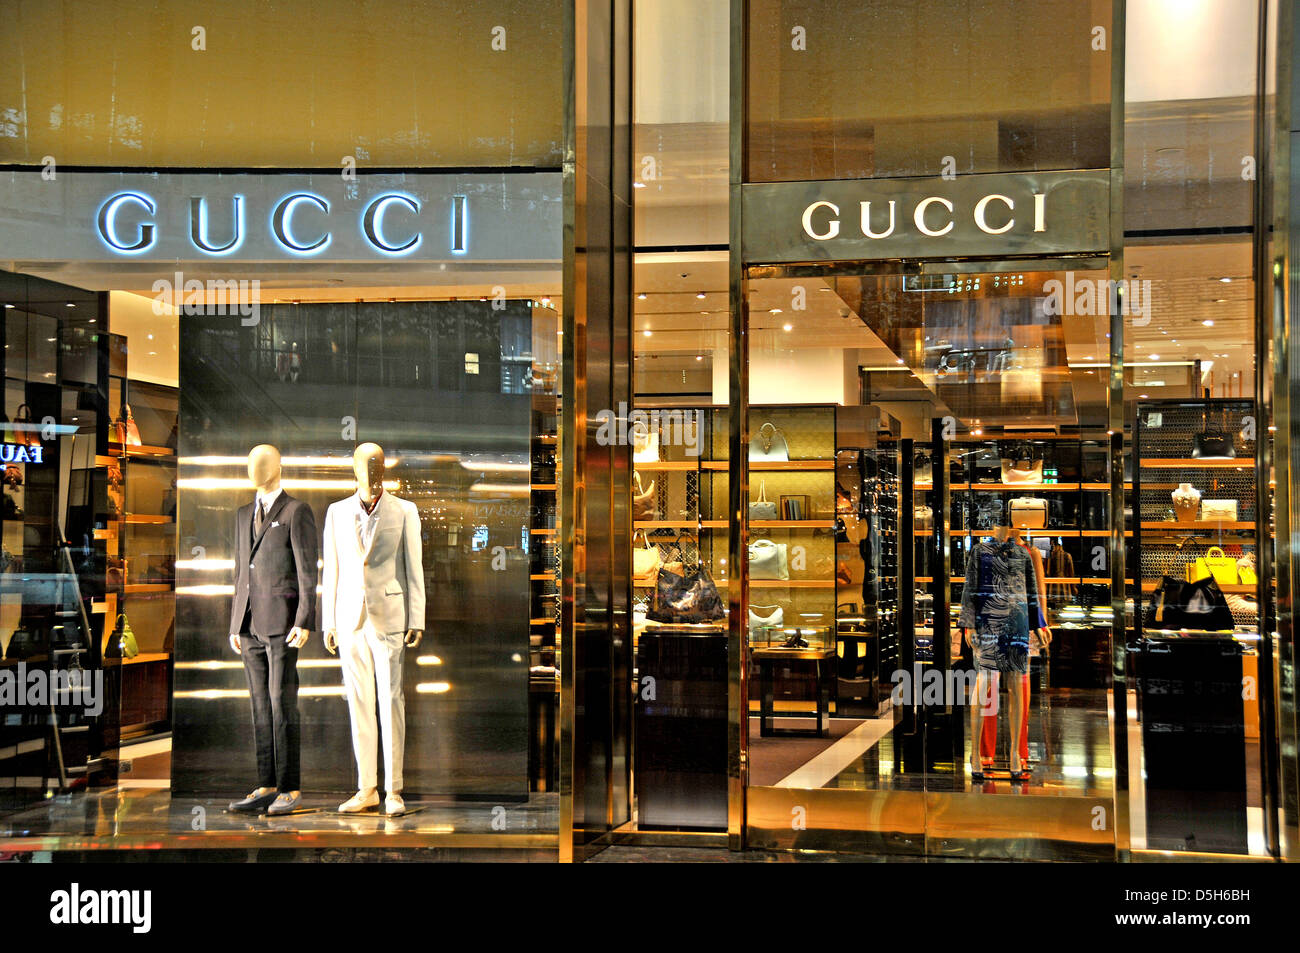 gucci outlet shopping